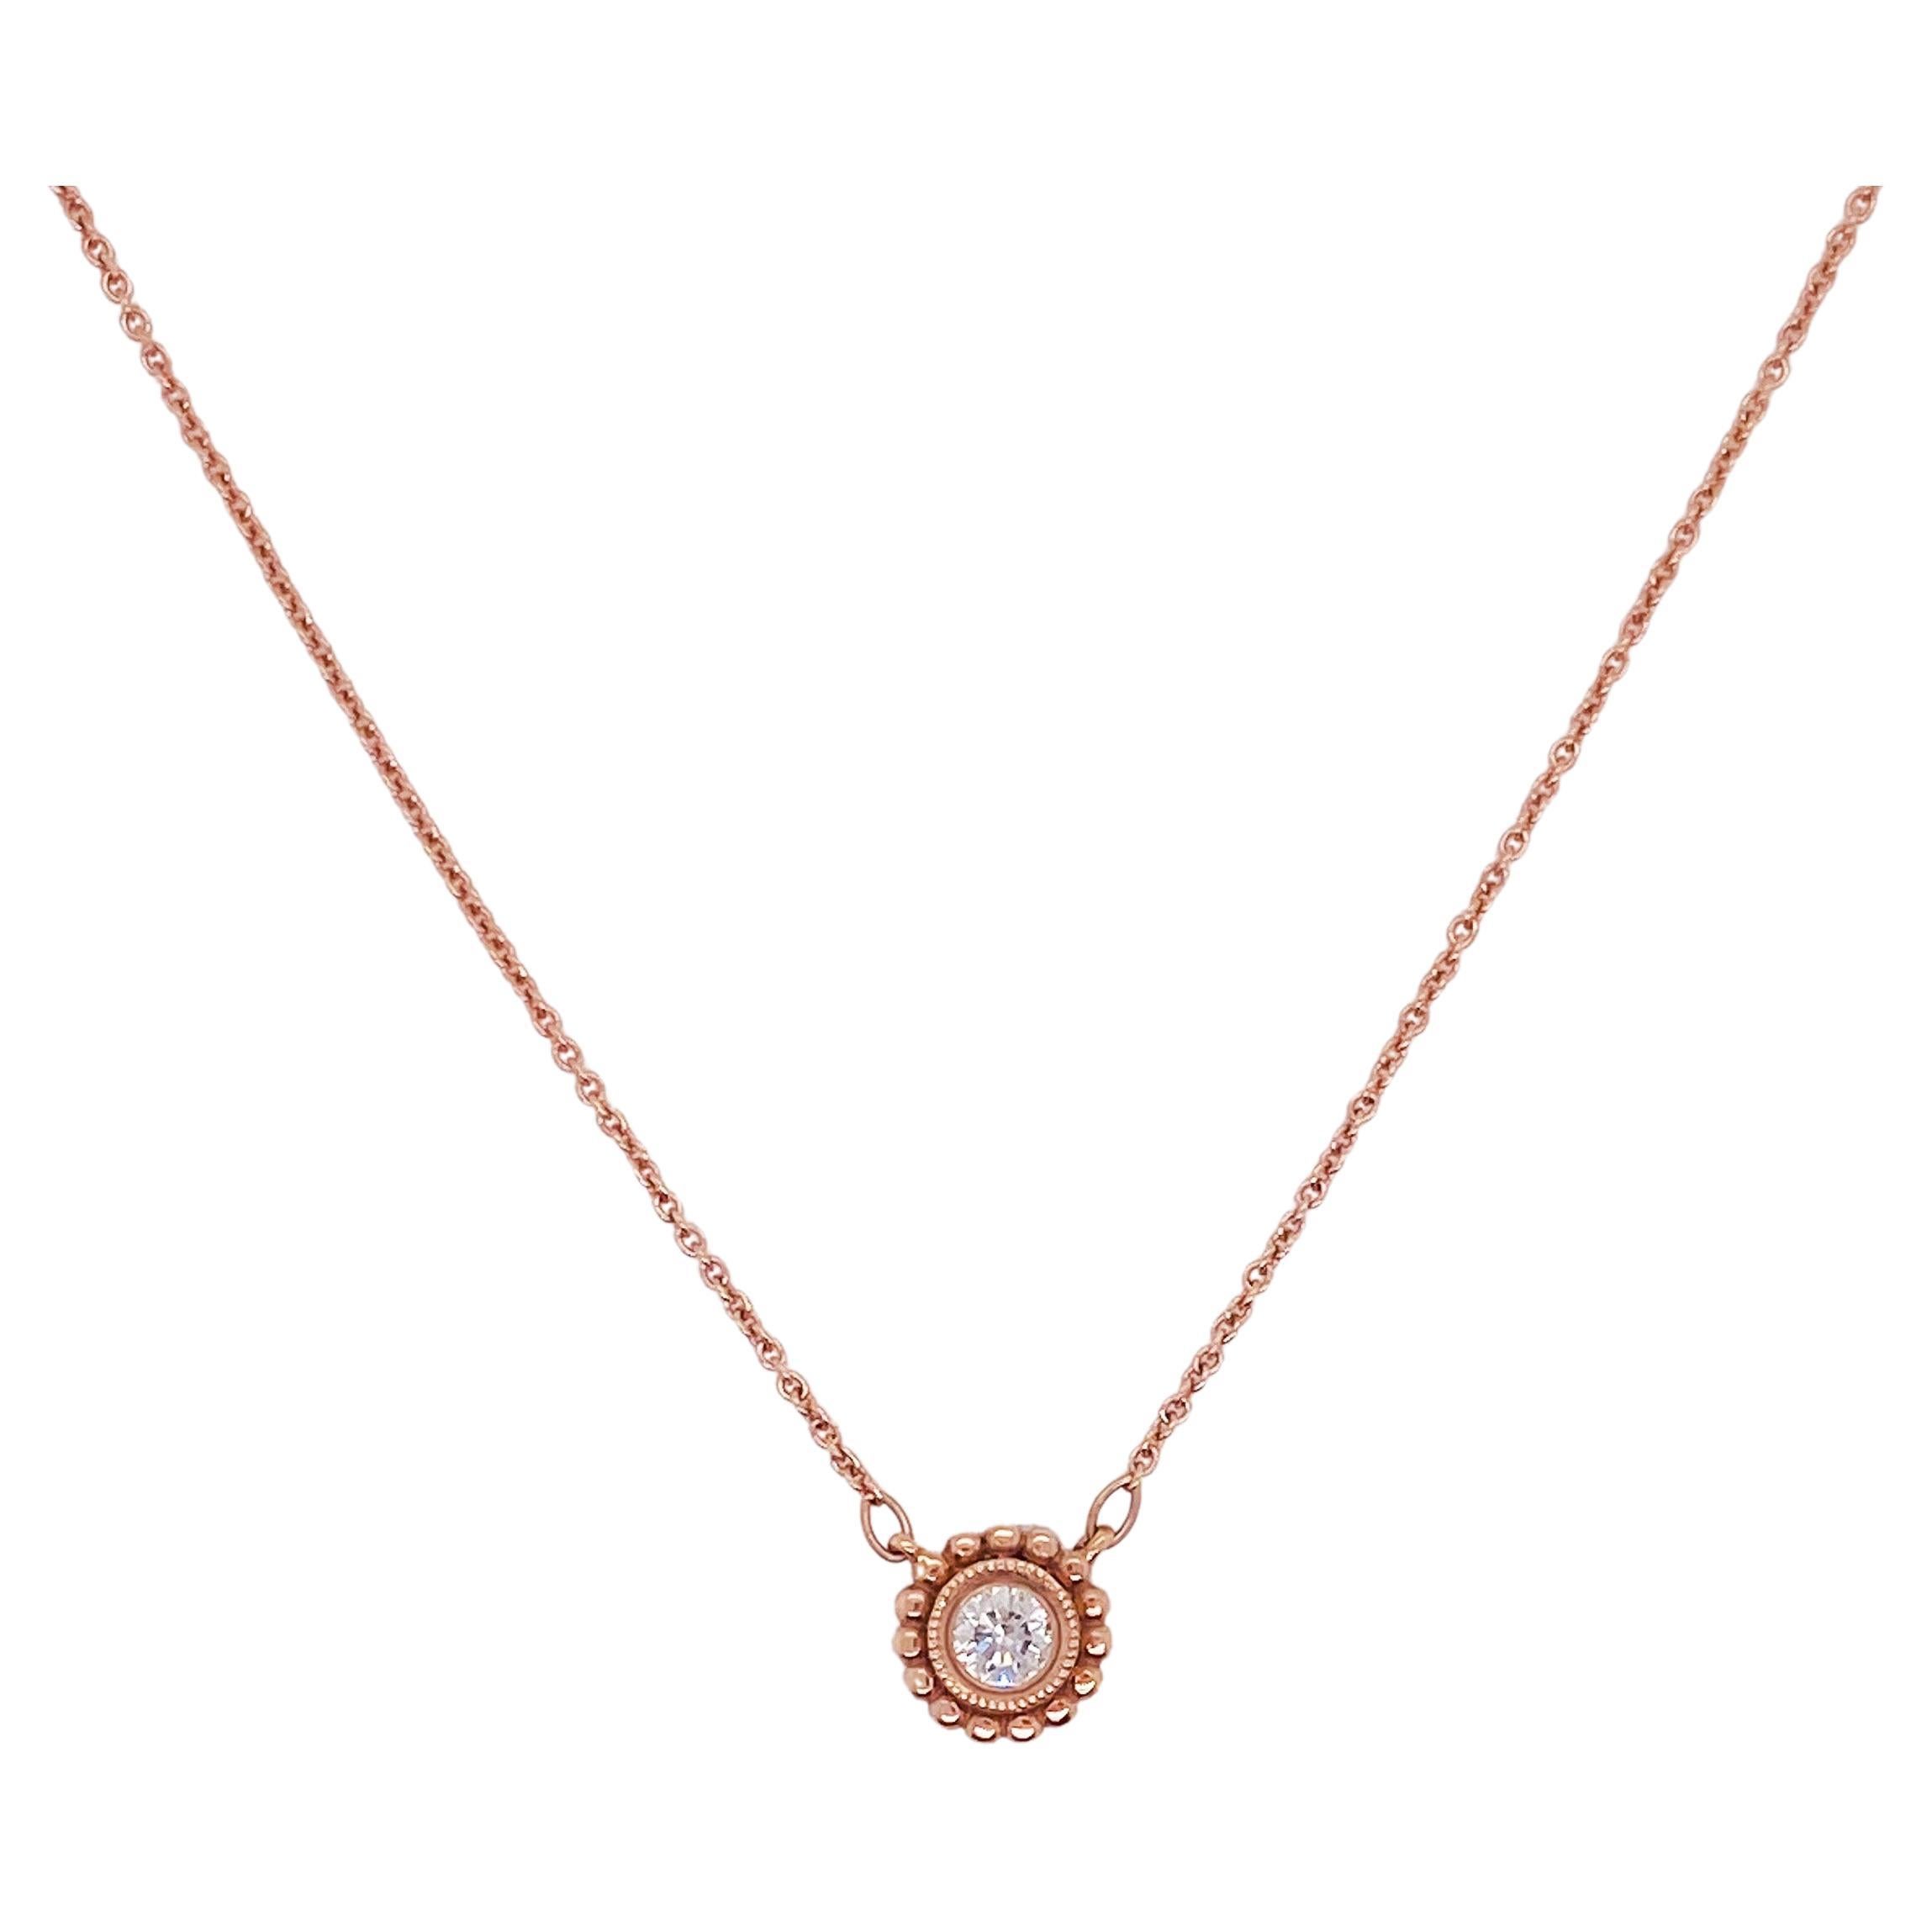 Dainty Diamond Daisy Necklace .12 Carats in 14K Rose Gold, April Birthstone LV For Sale